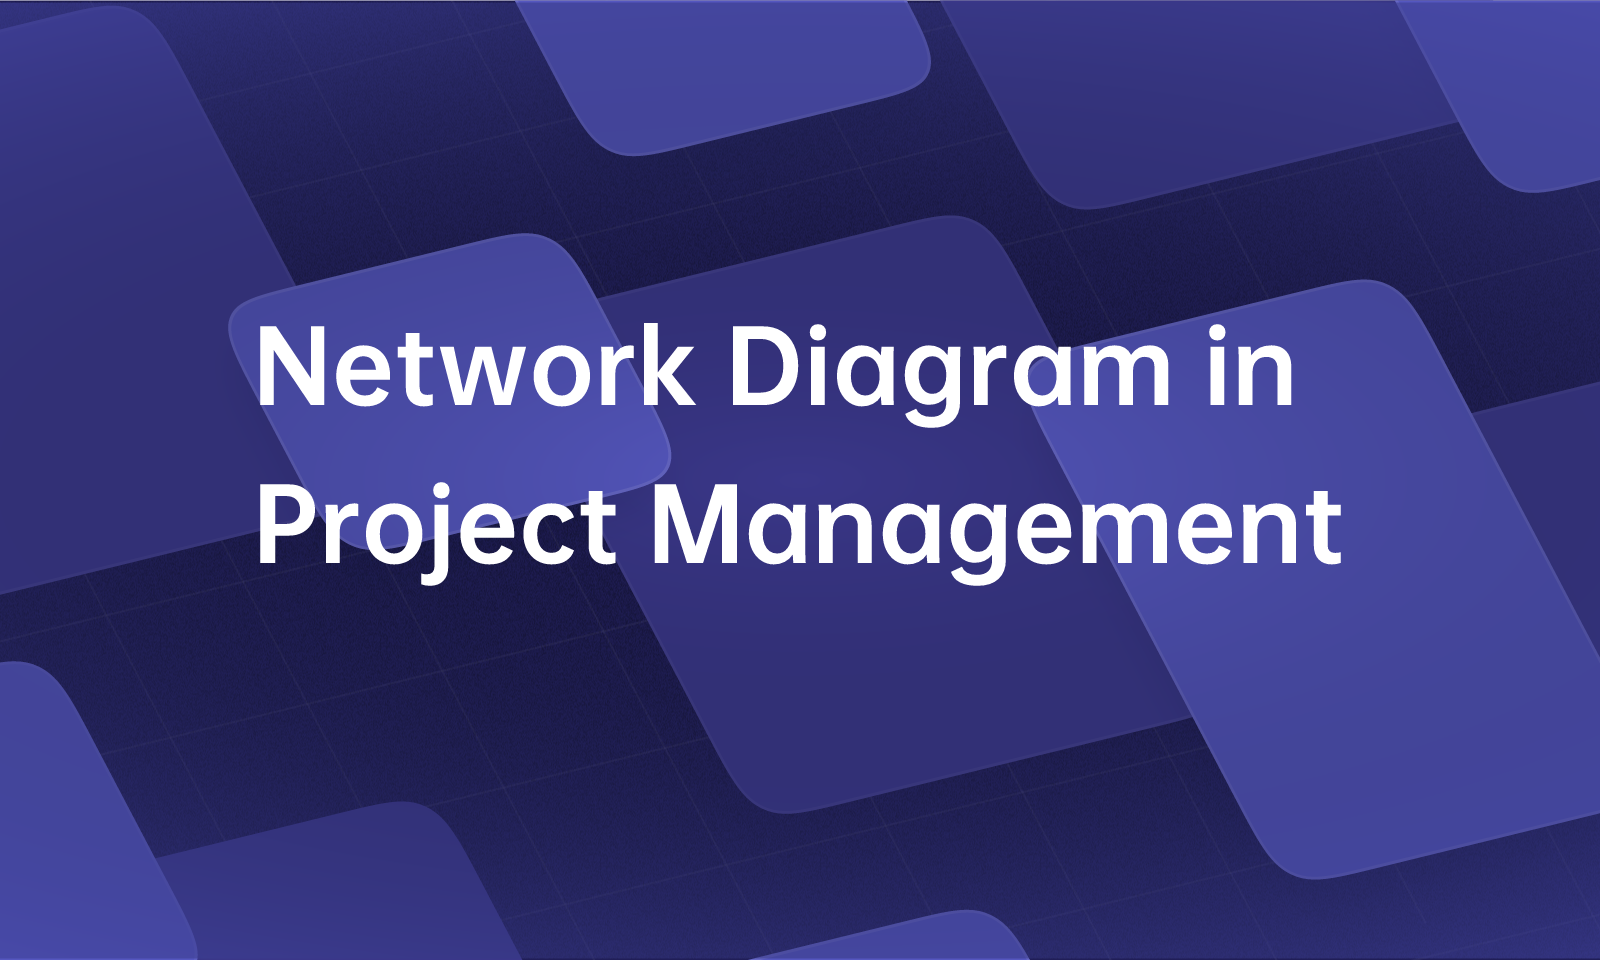 What Is a Network Diagram in Project Management?